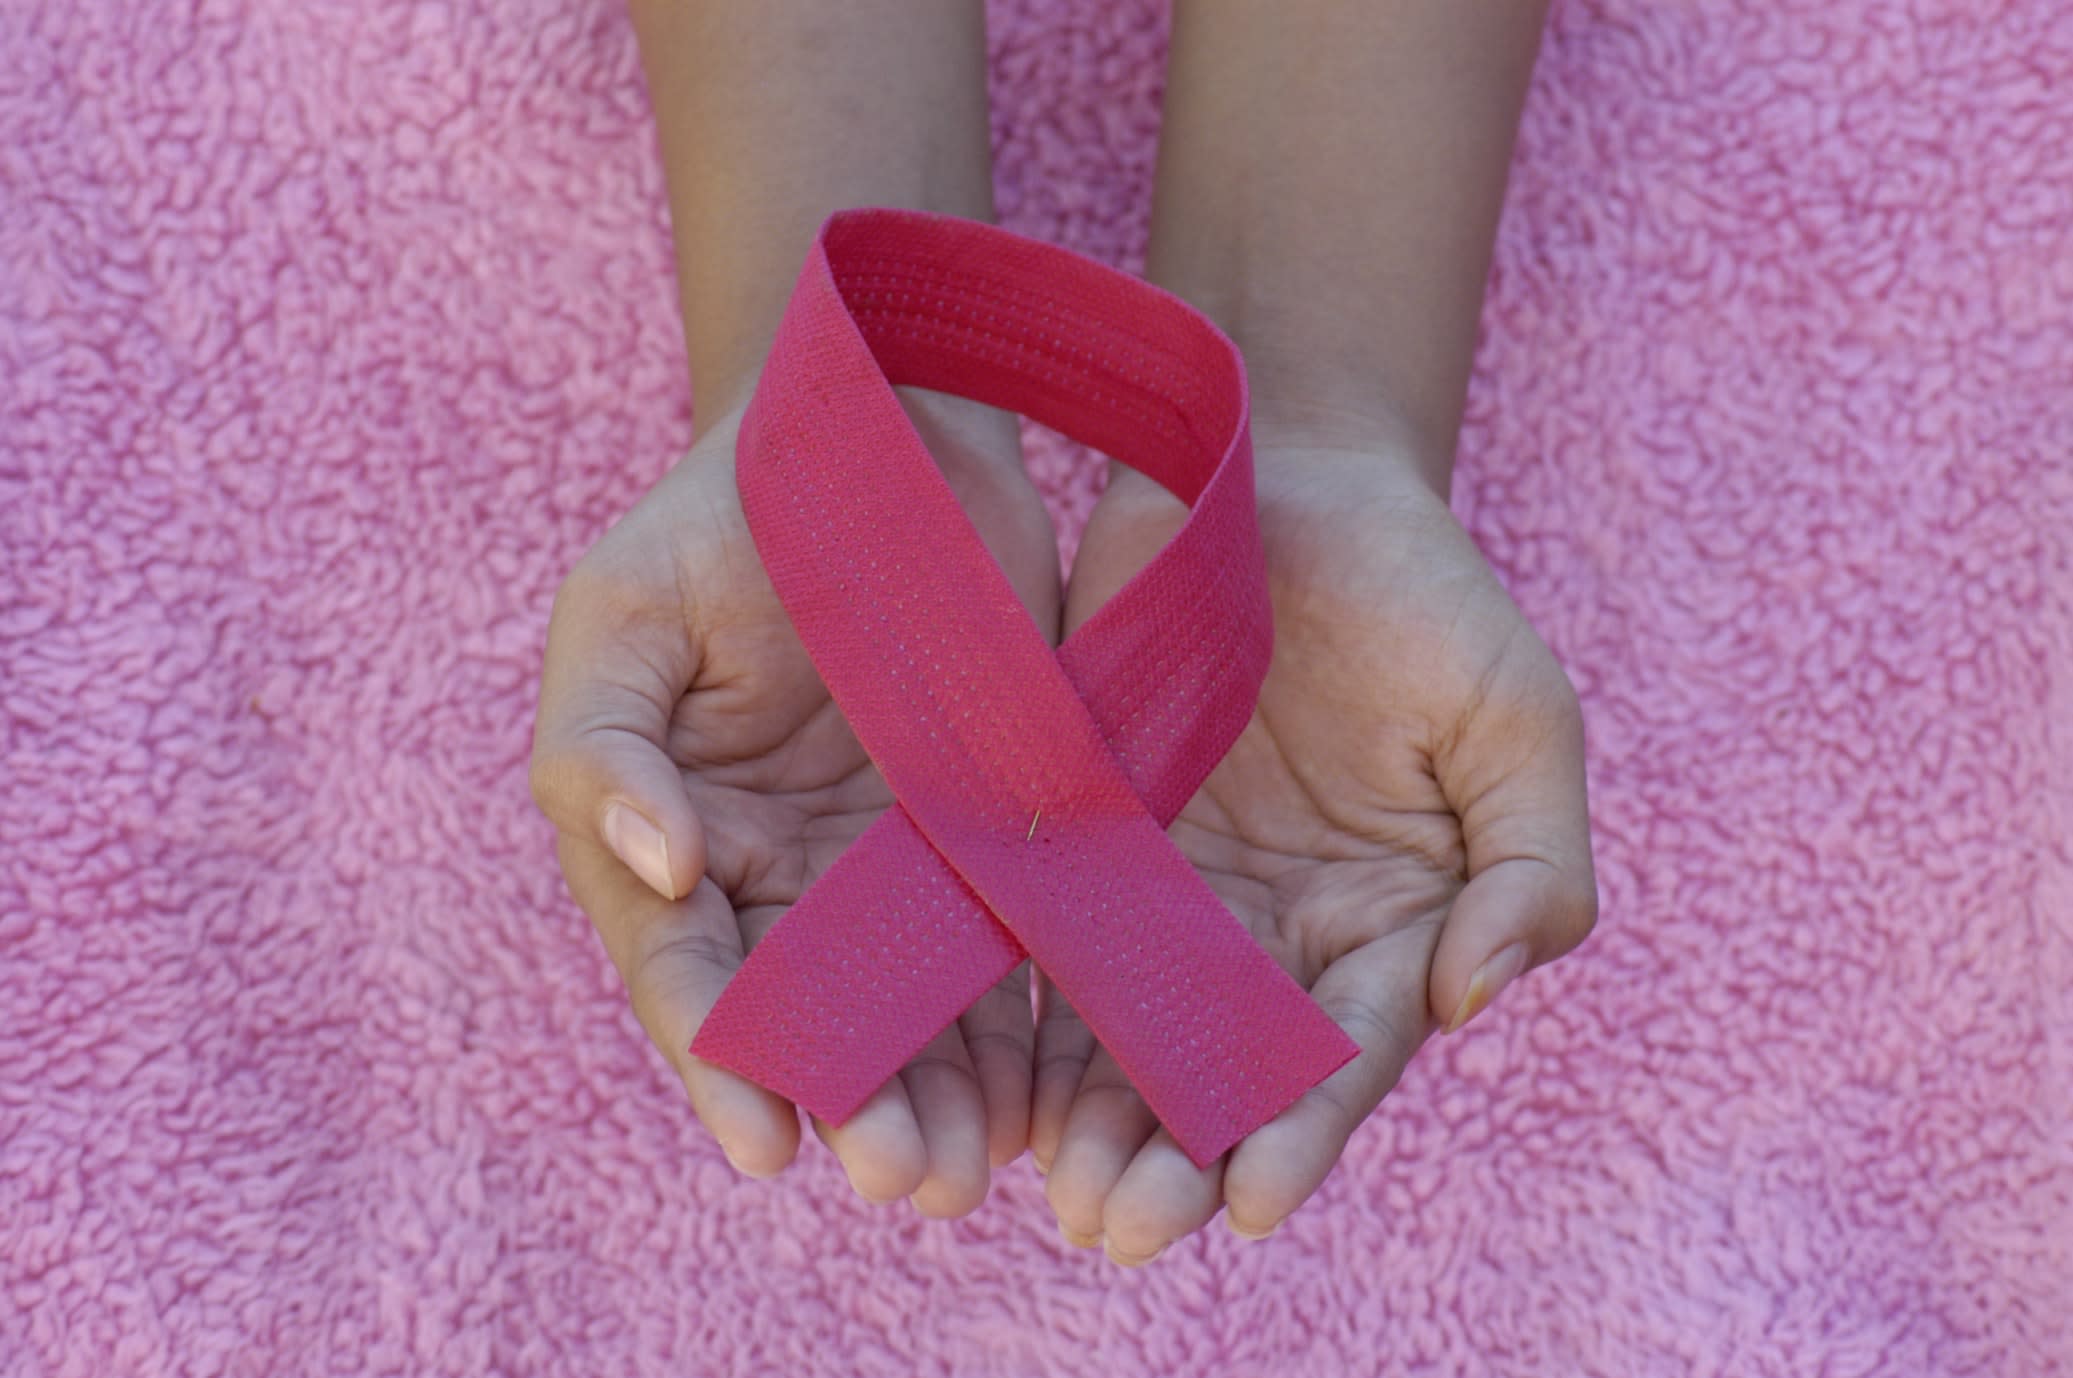 Breast Cancer Statistics – How Breast Cancer Survival Rates